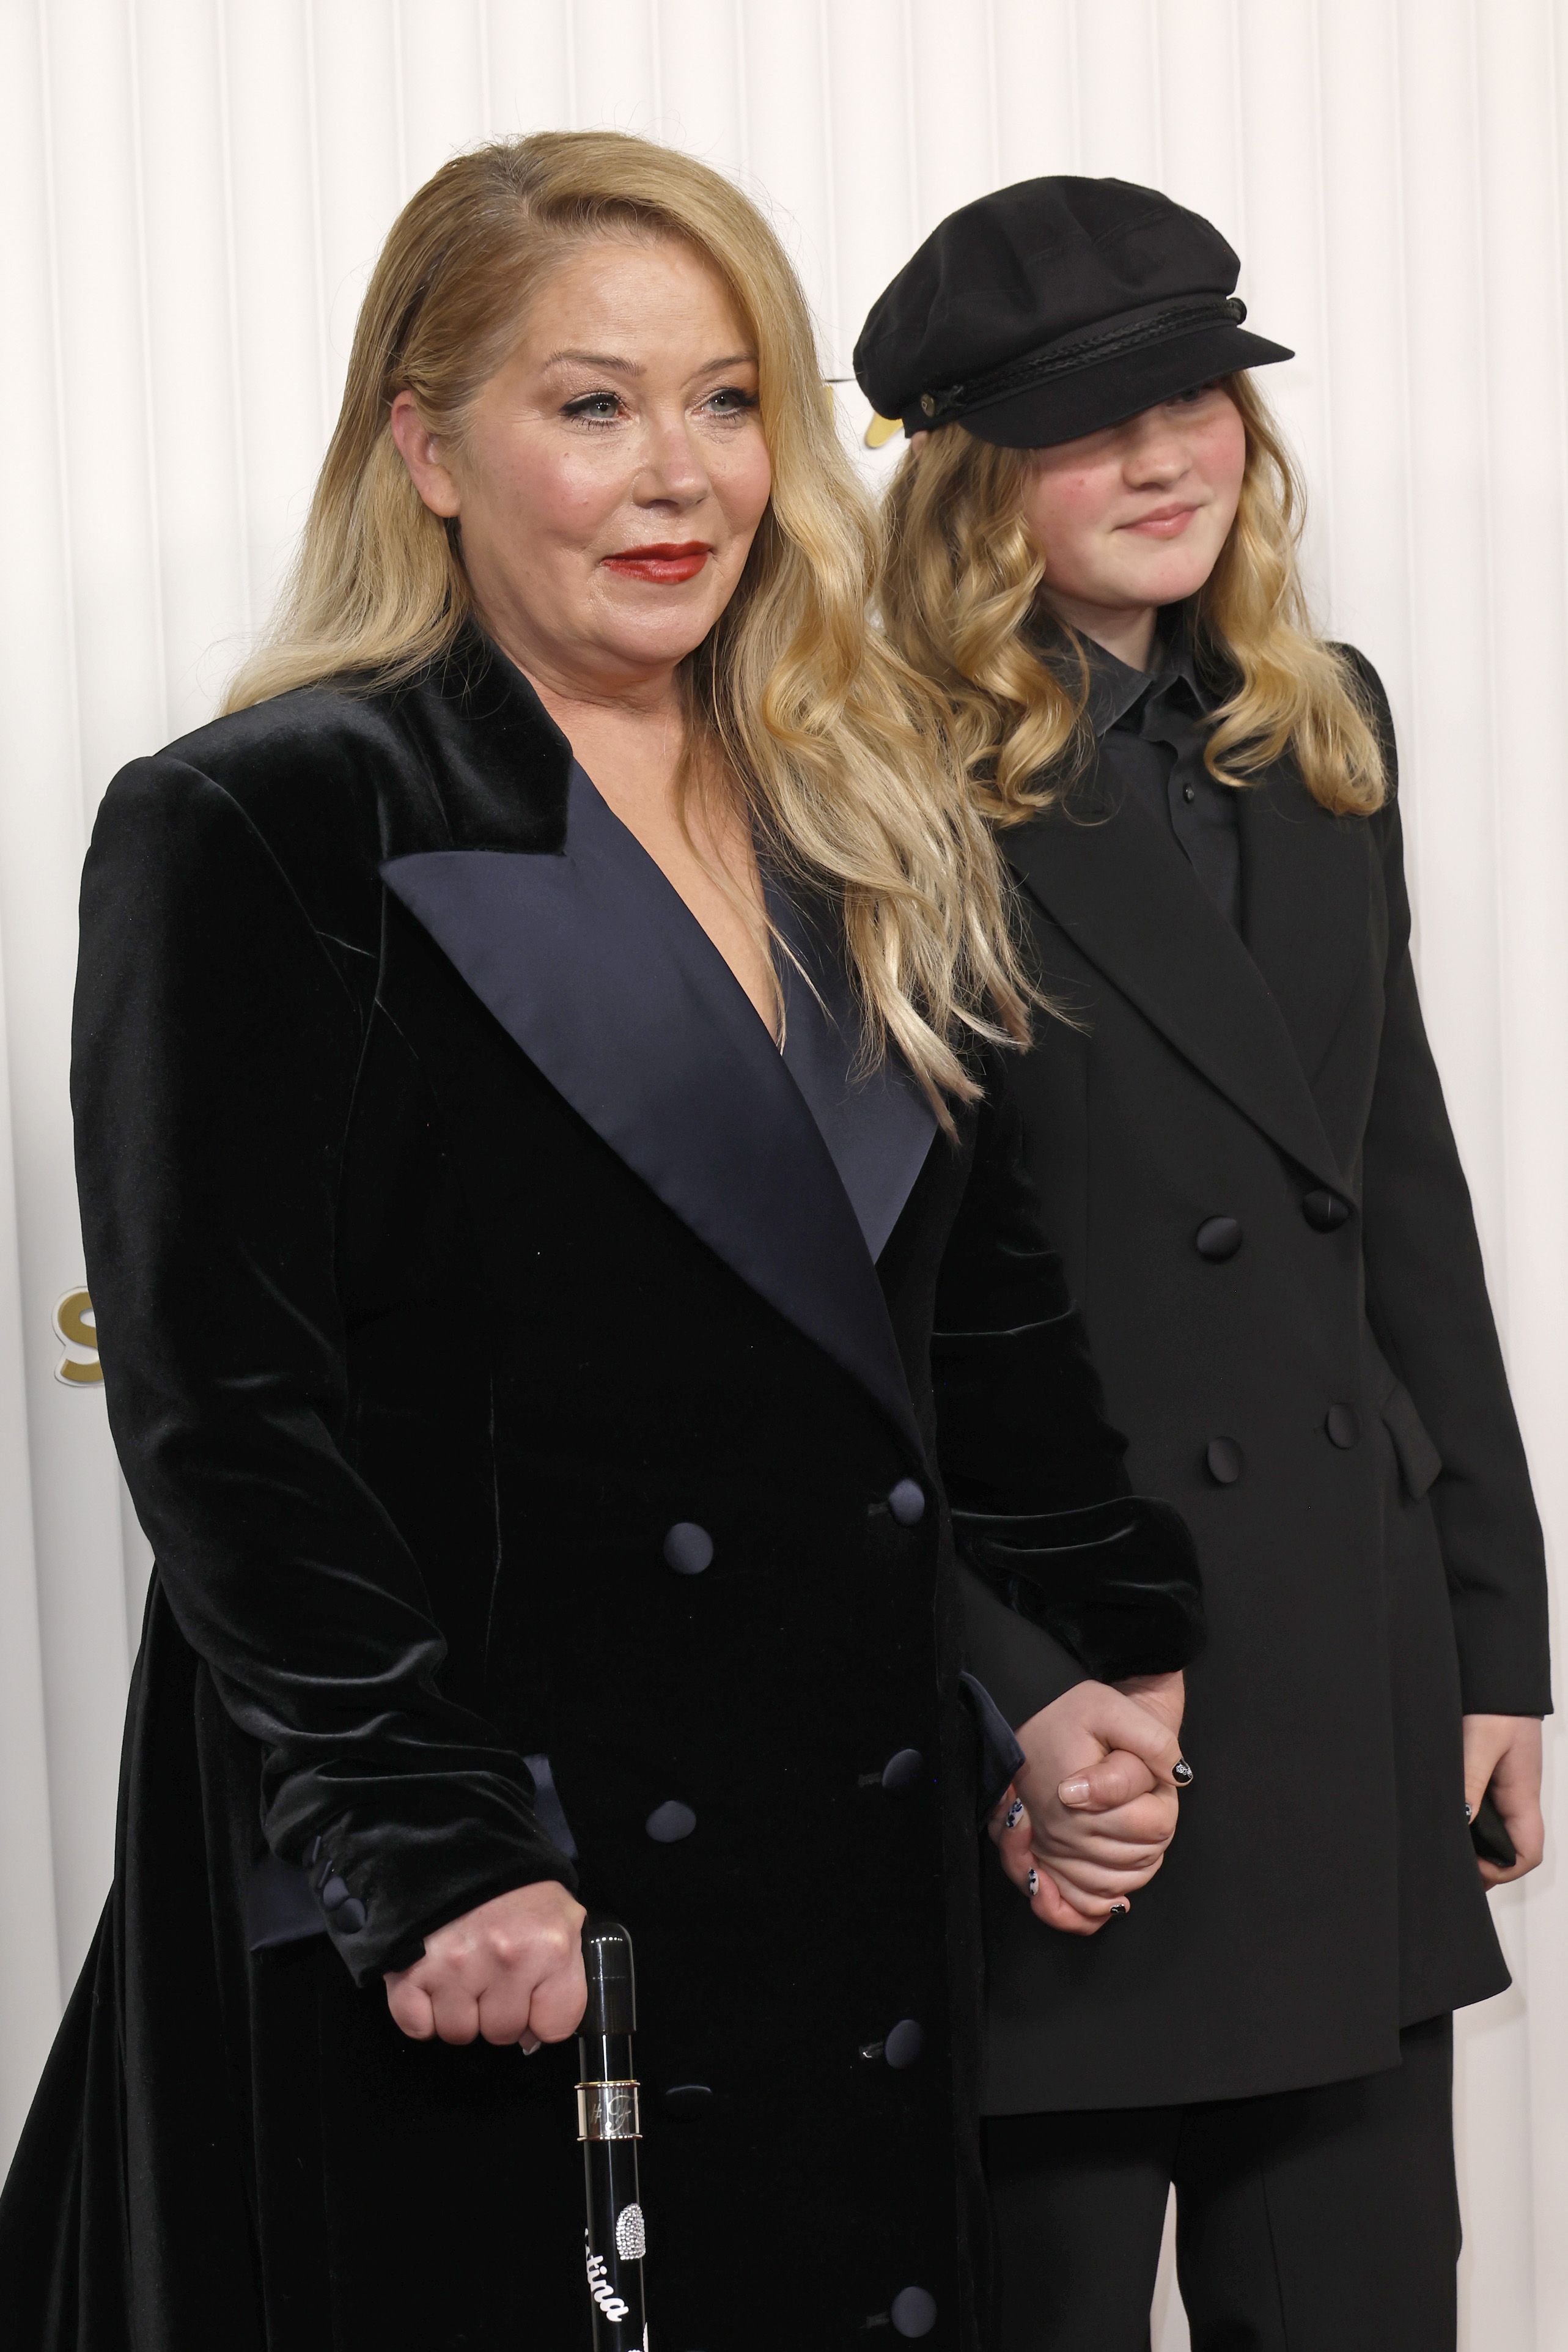 Christina Applegate and Sadie Grace LeNoble at the 29th Annual Screen Actors Guild Awards held at the Fairmont Century Plaza in Los Angeles, California, on February 26, 2023. | Source: Getty Images